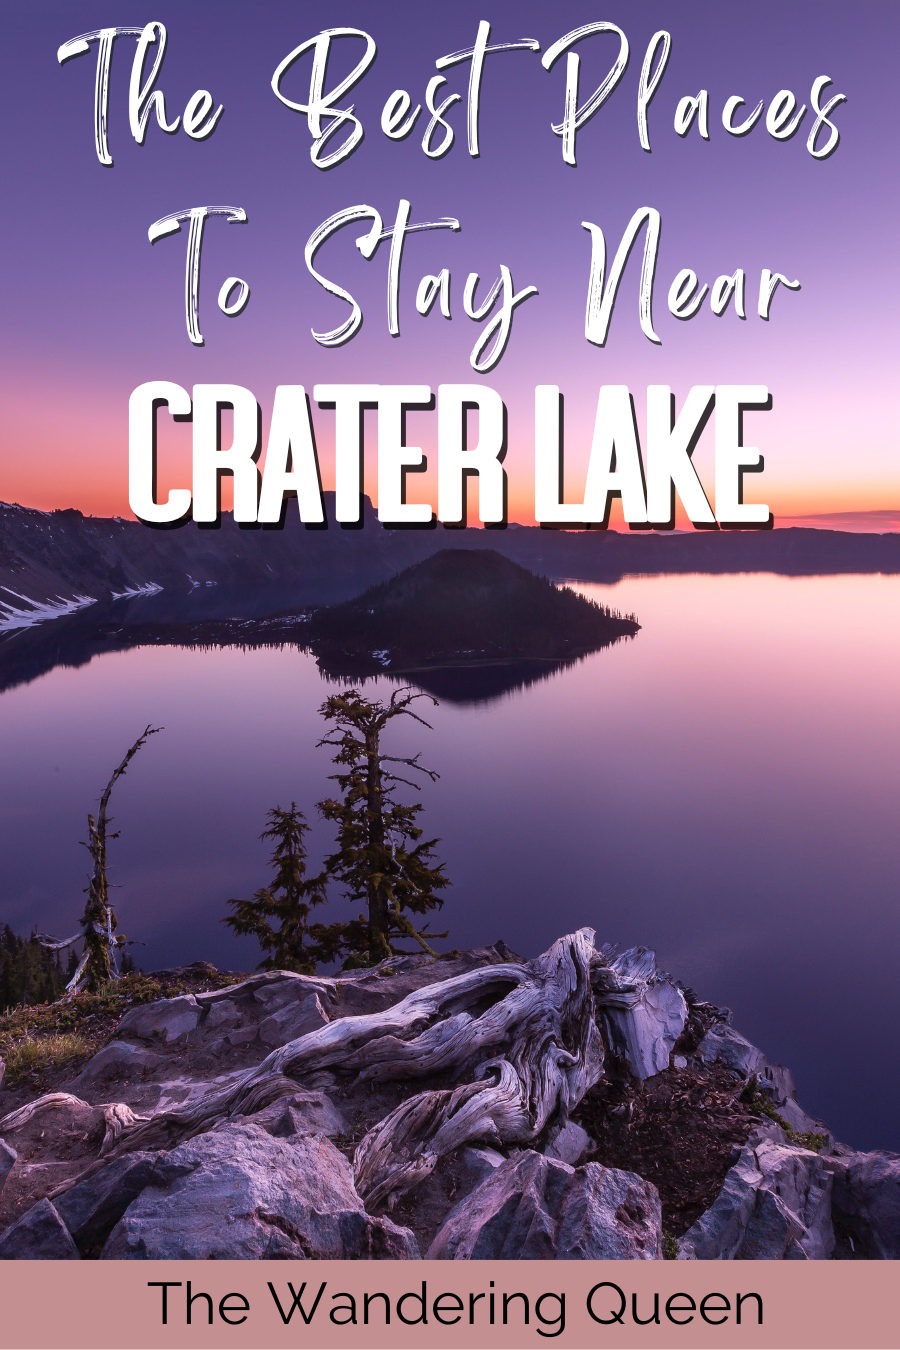 Where to Stay Near Crater Lake National Park | Lodging & More - The ...